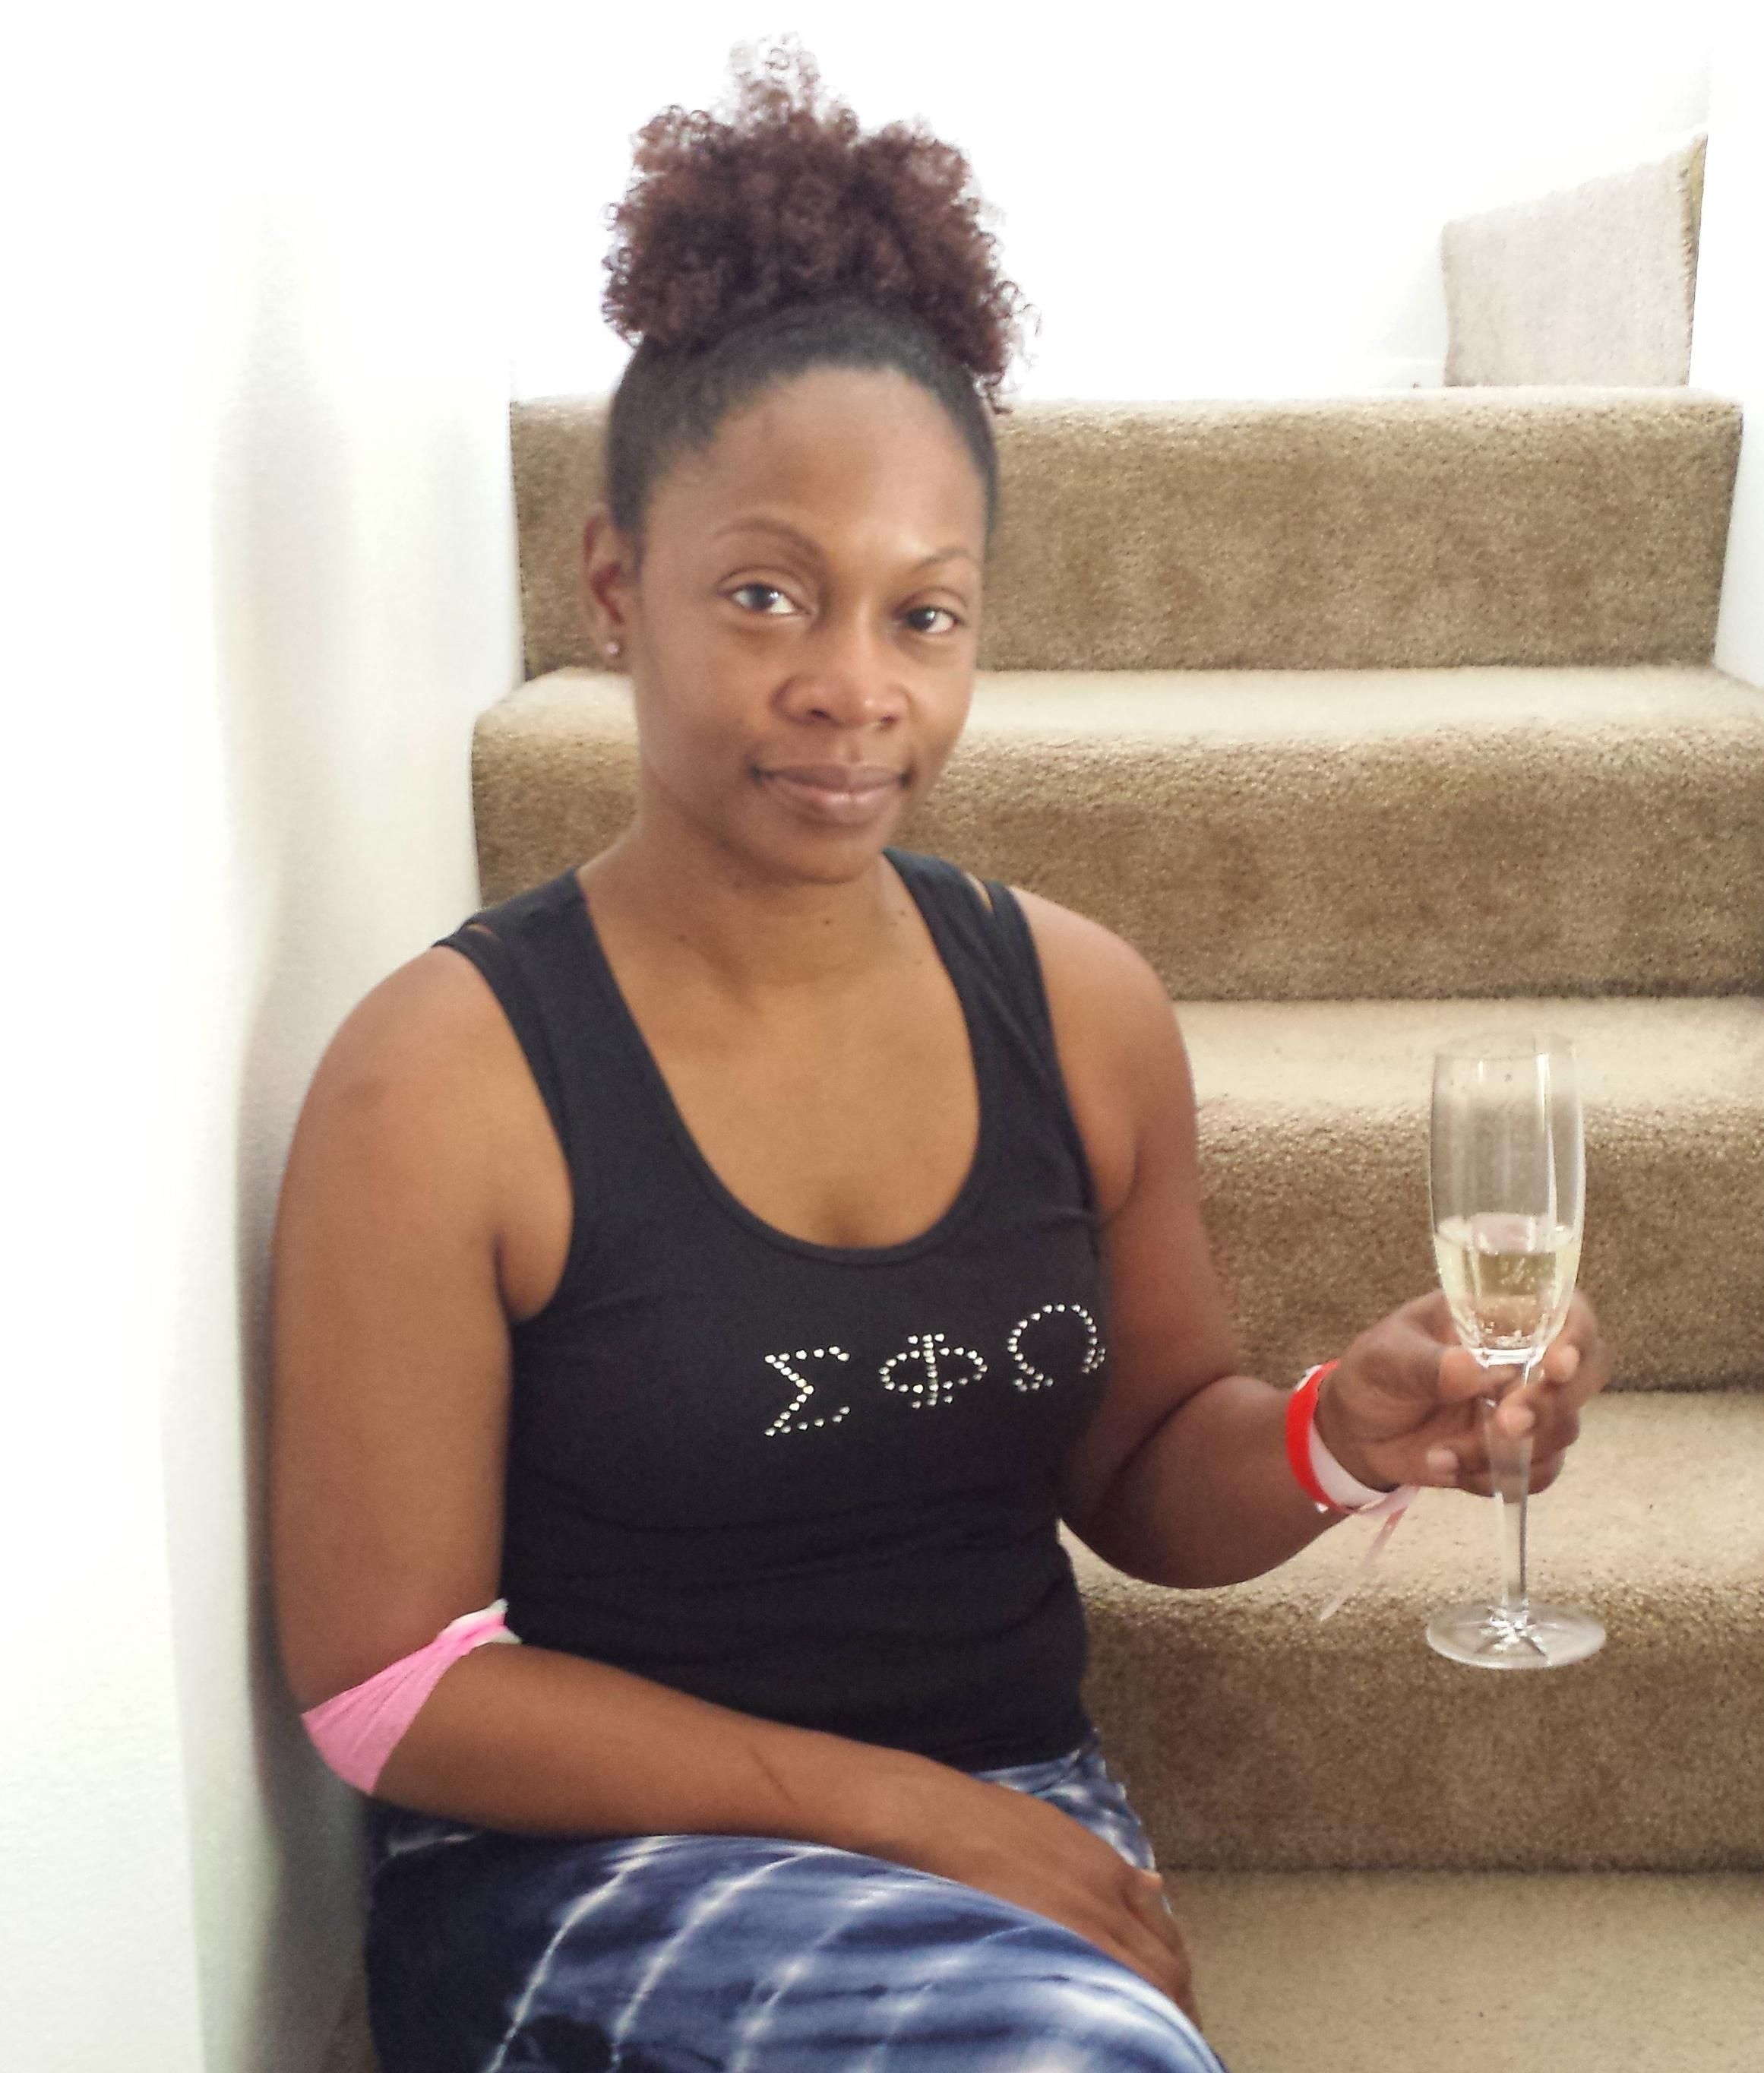 Kimberly with her champagne, celebrating u201ckicking canceru2019s buttu201d after her diagnosis, July 24, 2015.